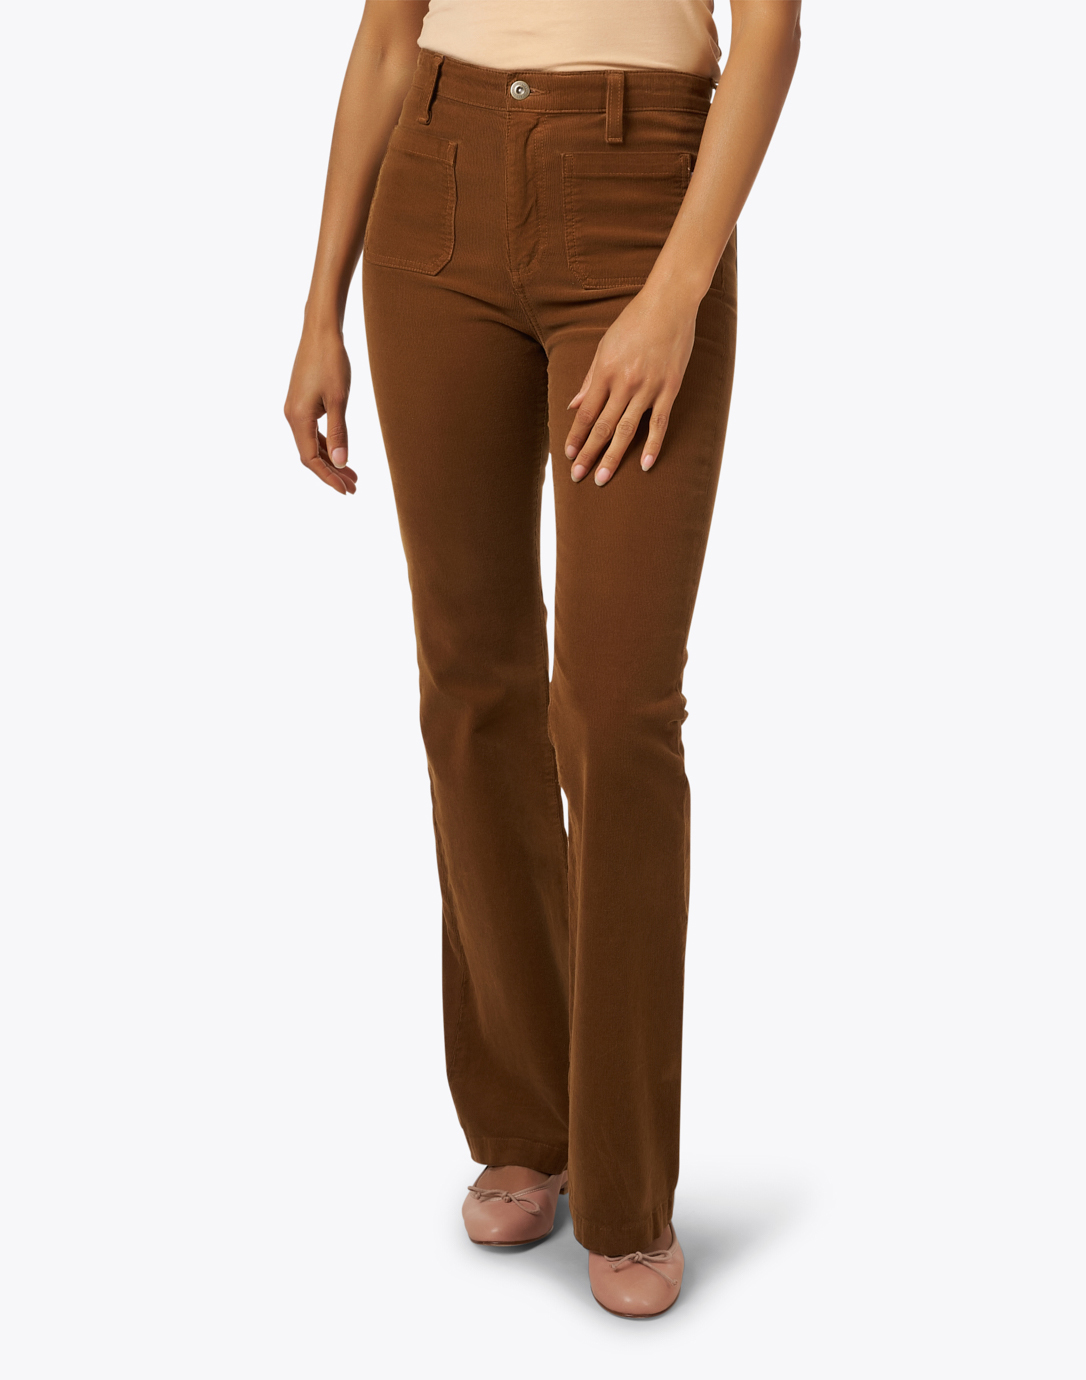 Corduroy Pants with Pockets for Womens High Waist Pleated Front